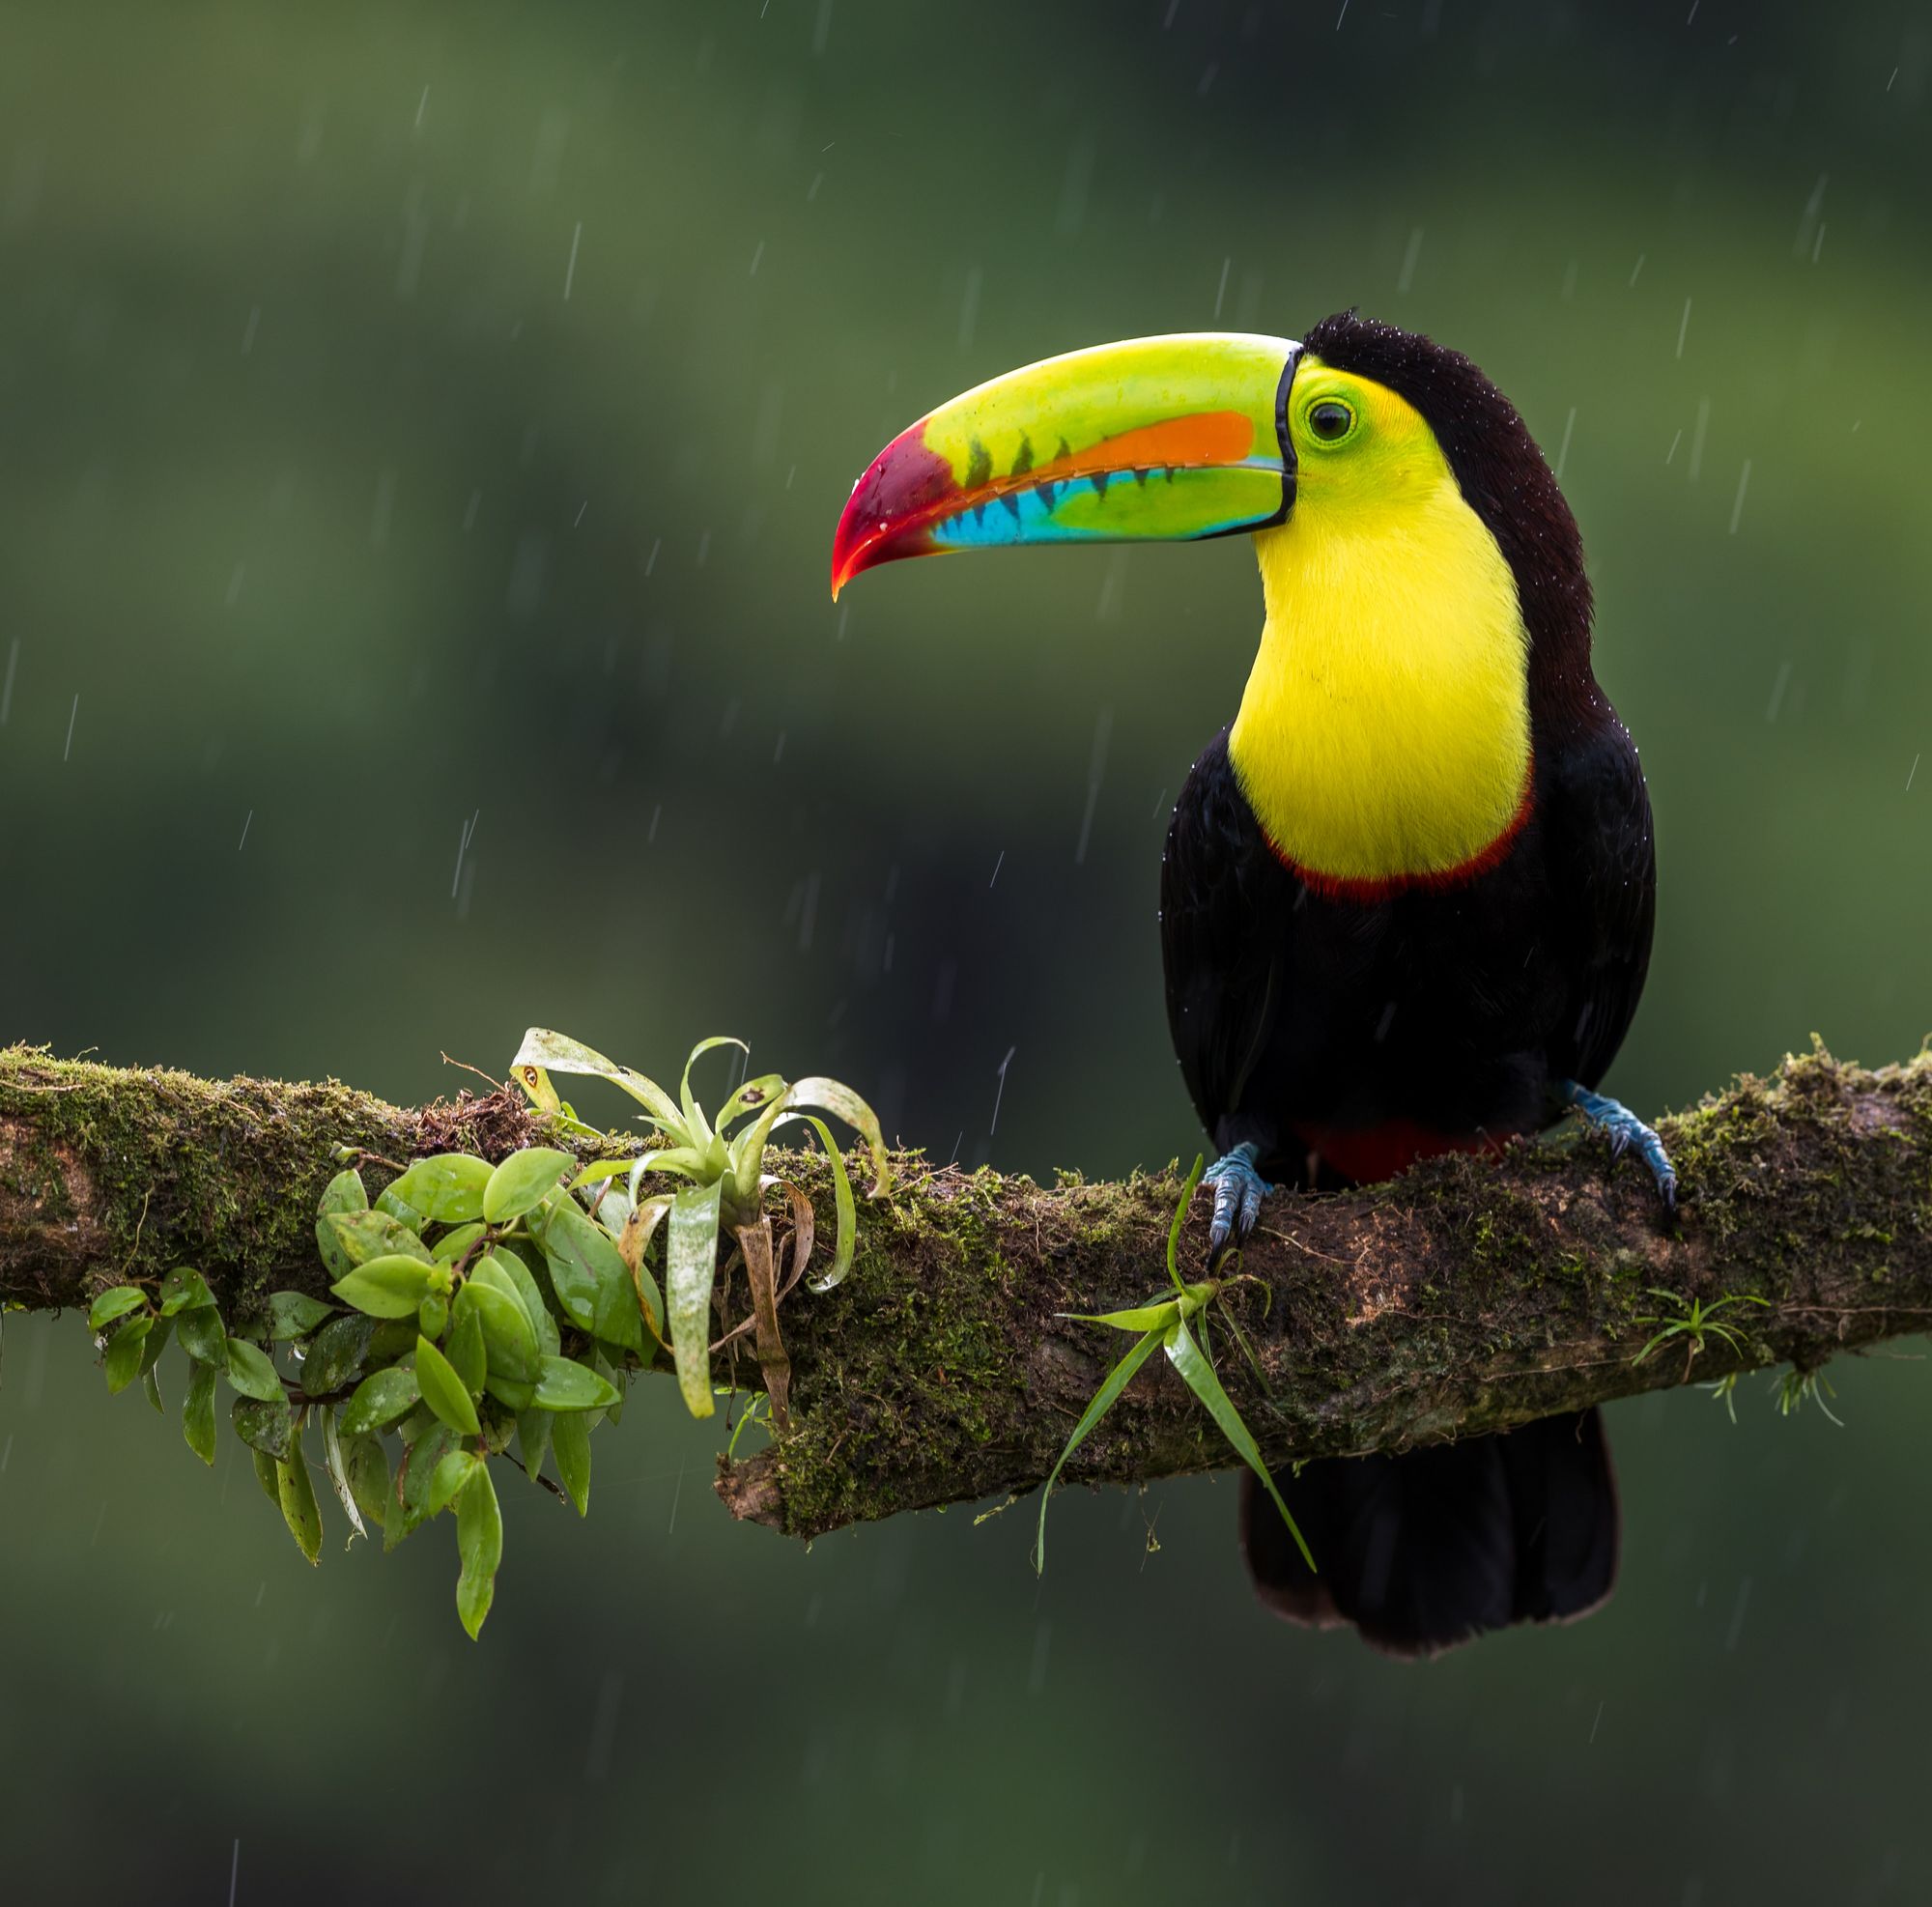 A toucan perched on a tree branch in Costa Rica